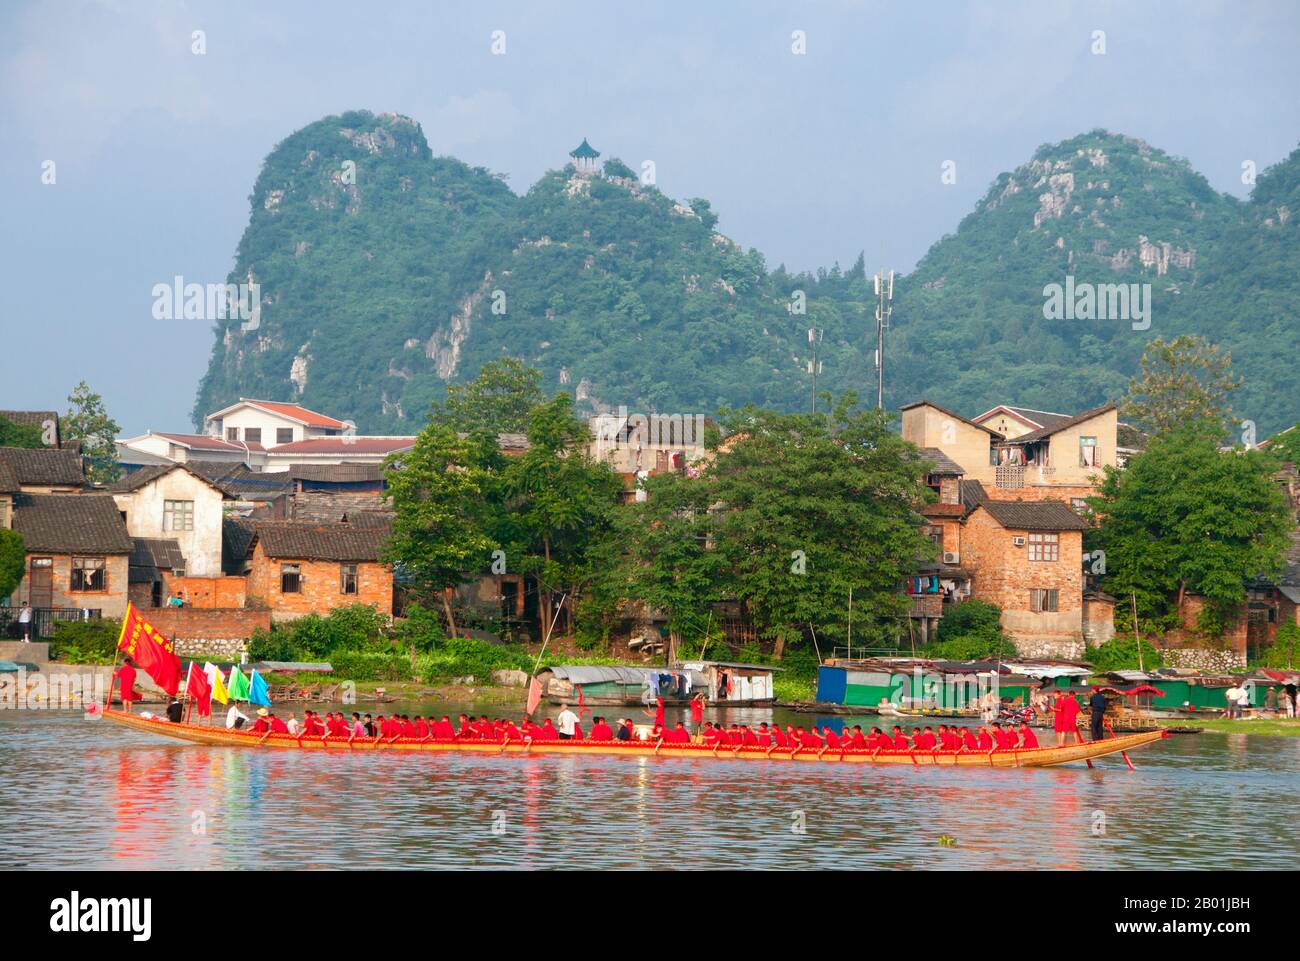 China: Dragon boat on the Li River with Seven Star Park in the background, Guilin, Guangxi Province.  Guilin's Dragon Boat Festival is held on the fifth day of the fifth month (May) of the Chinese lunar calendar every 3 years. The festival was originally held in memory of the great Chinese poet, Quyuan.  The name Guilin means ‘Cassia Woods’ and is named after the osmanthus (cassia) blossoms that bloom throughout the autumn period.  Guilin is the scene of China’s most famous landscapes, inspiring thousands of paintings over many centuries. Stock Photo